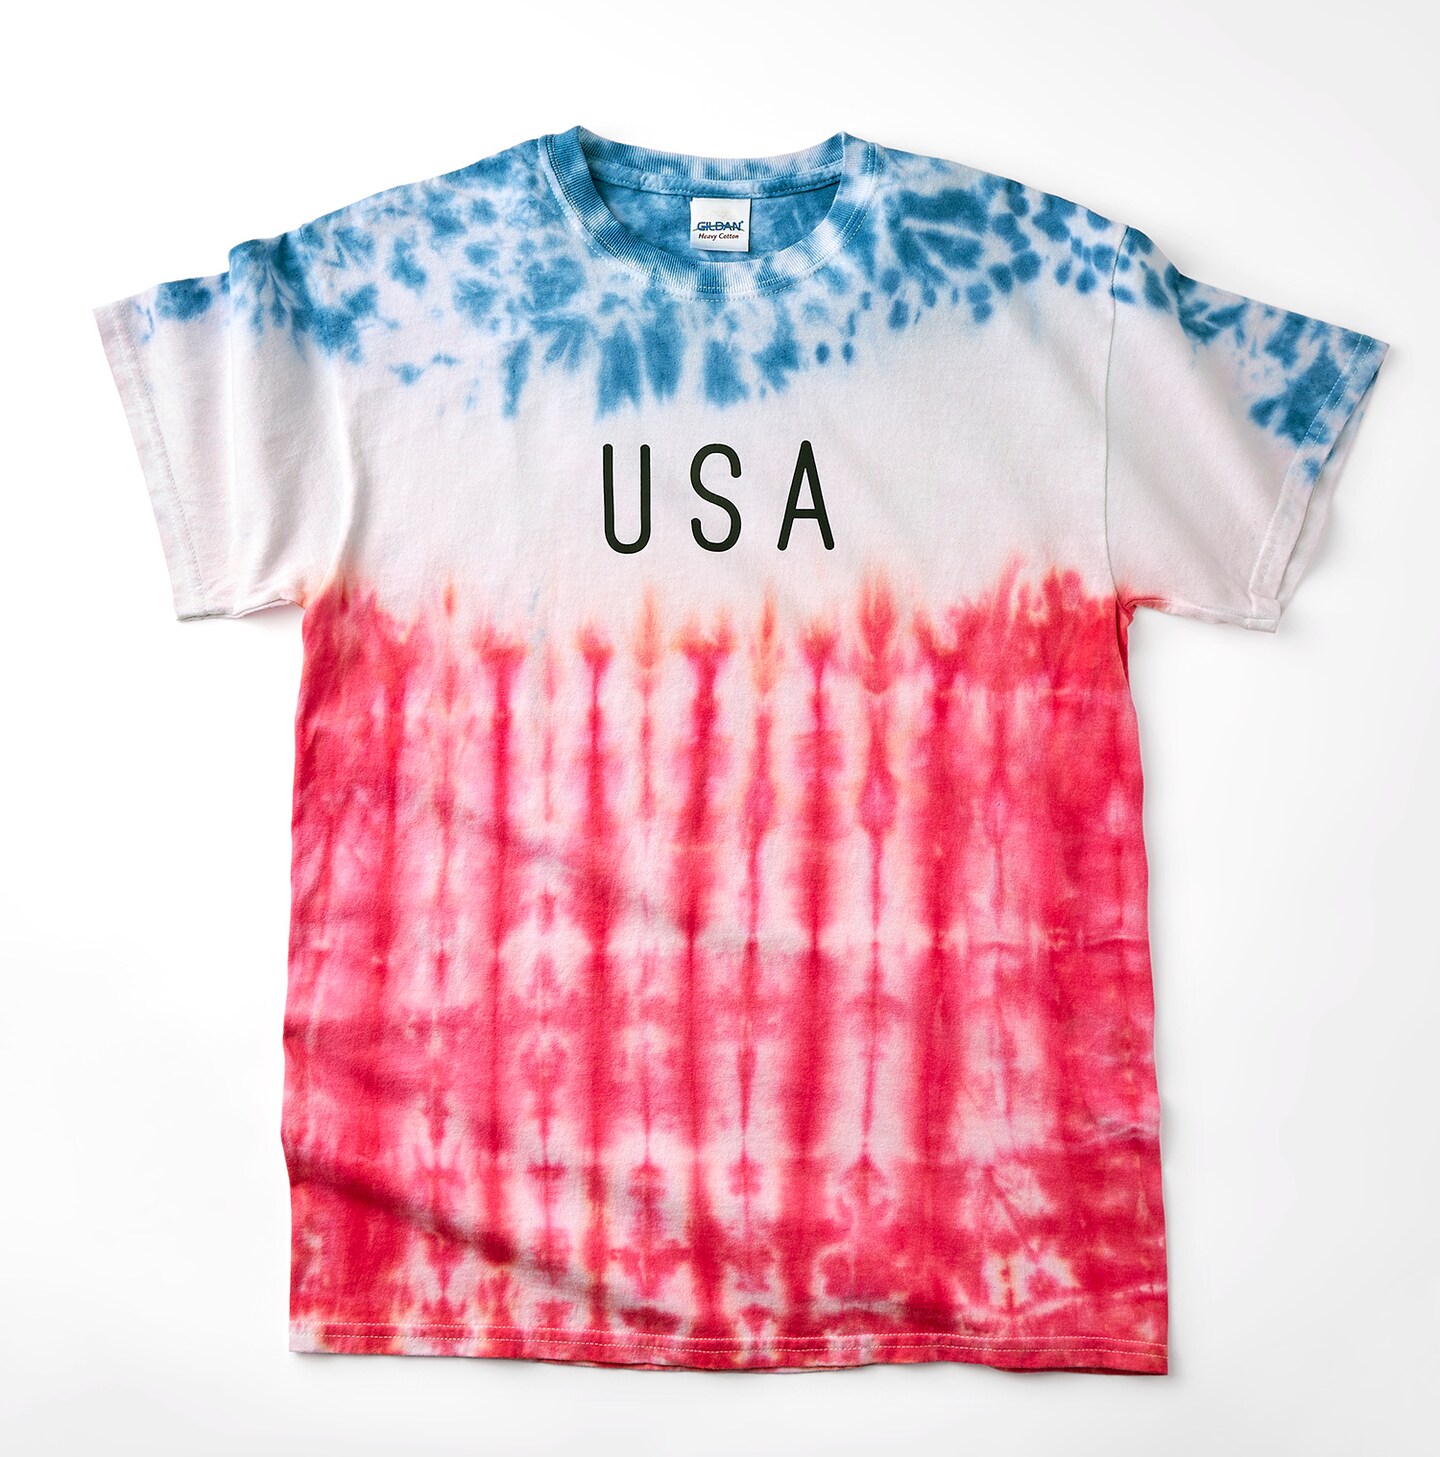 To Tie-Dye for Clothing - Daybreak Commerce